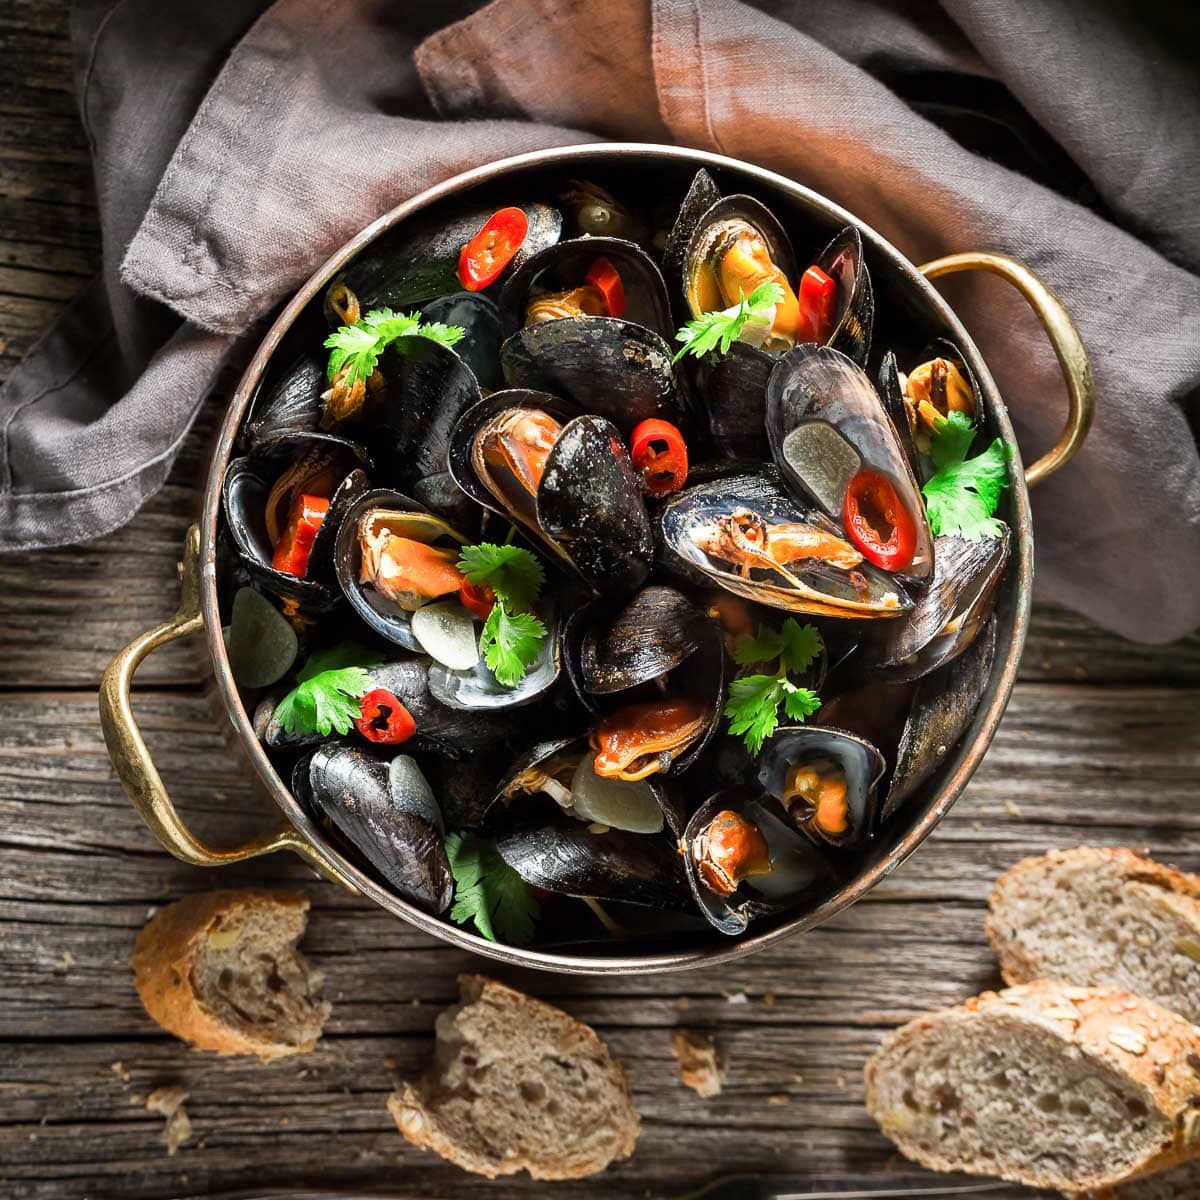 An overhead shot of a copper pot filled with steamed mussels garnished with red chili peppers and cilantro on a wooden board with sliced bread and a gray napkin on the side.